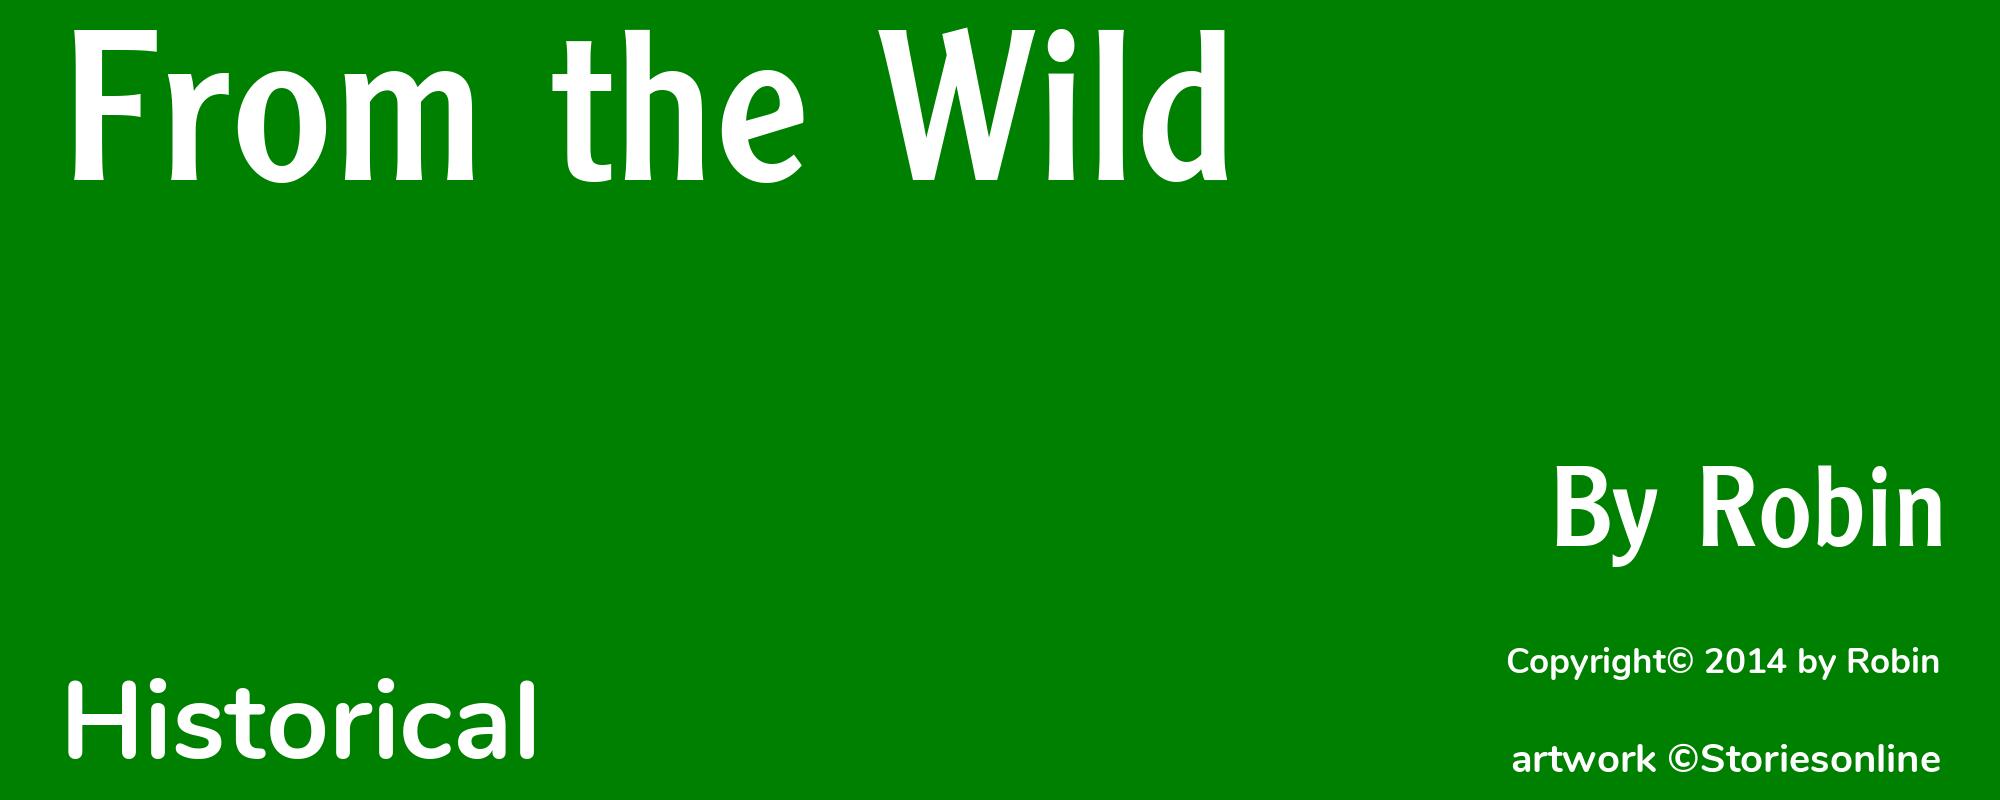 From the Wild - Cover